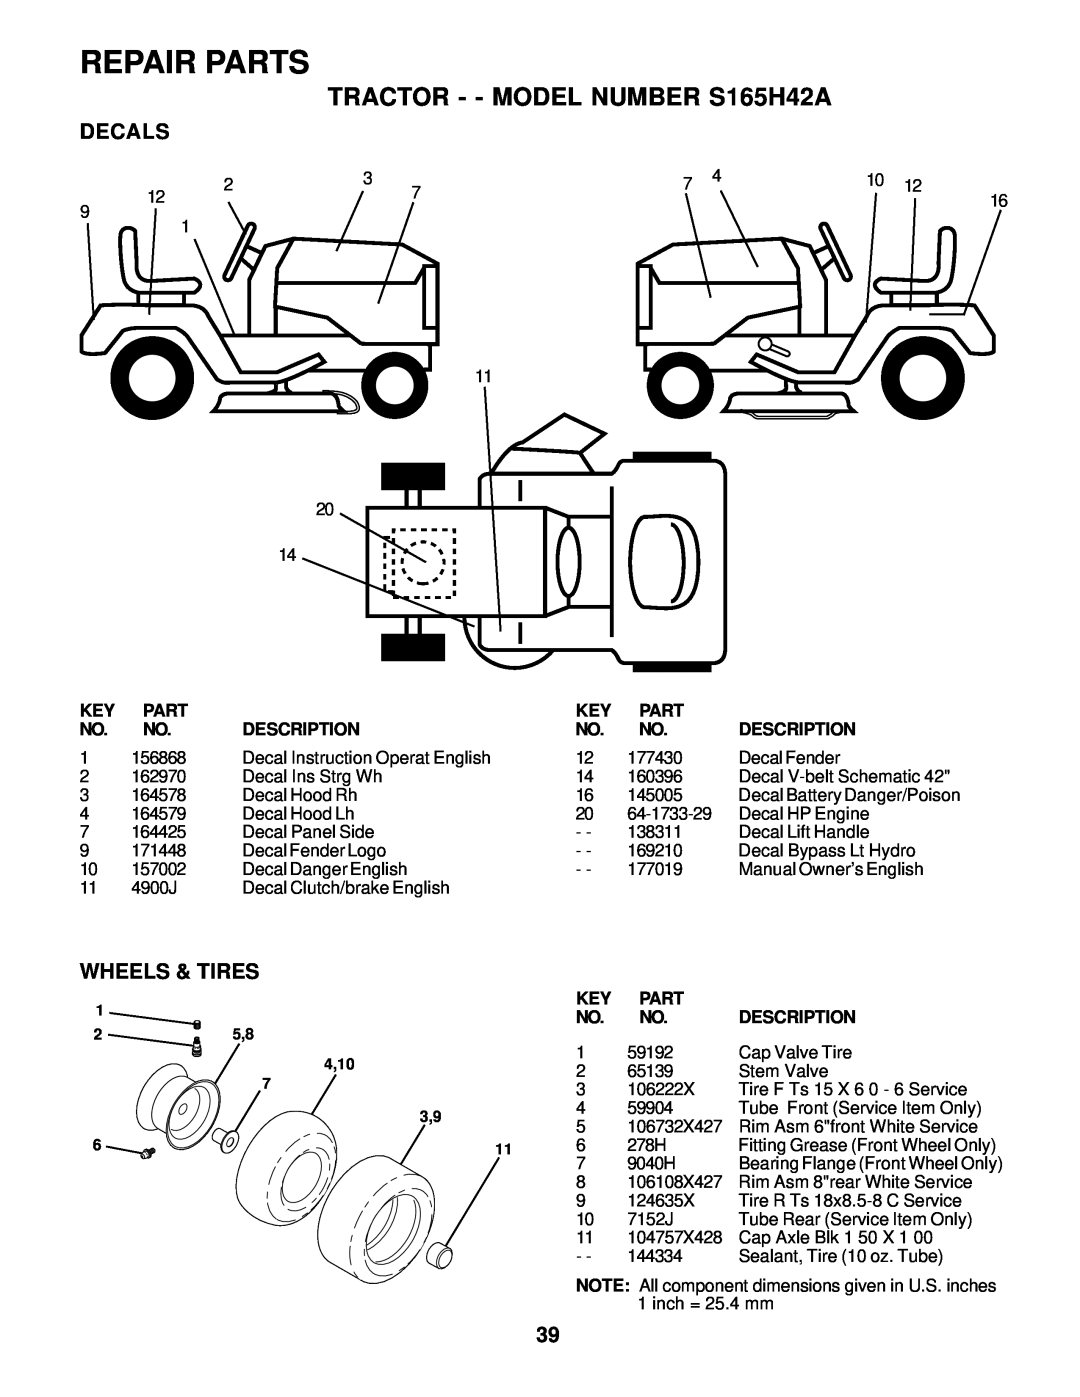 Weed Eater 177019 manual Decals, Wheels & Tires, Repair Parts, TRACTOR - - MODEL NUMBER S165H42A, 4,10 